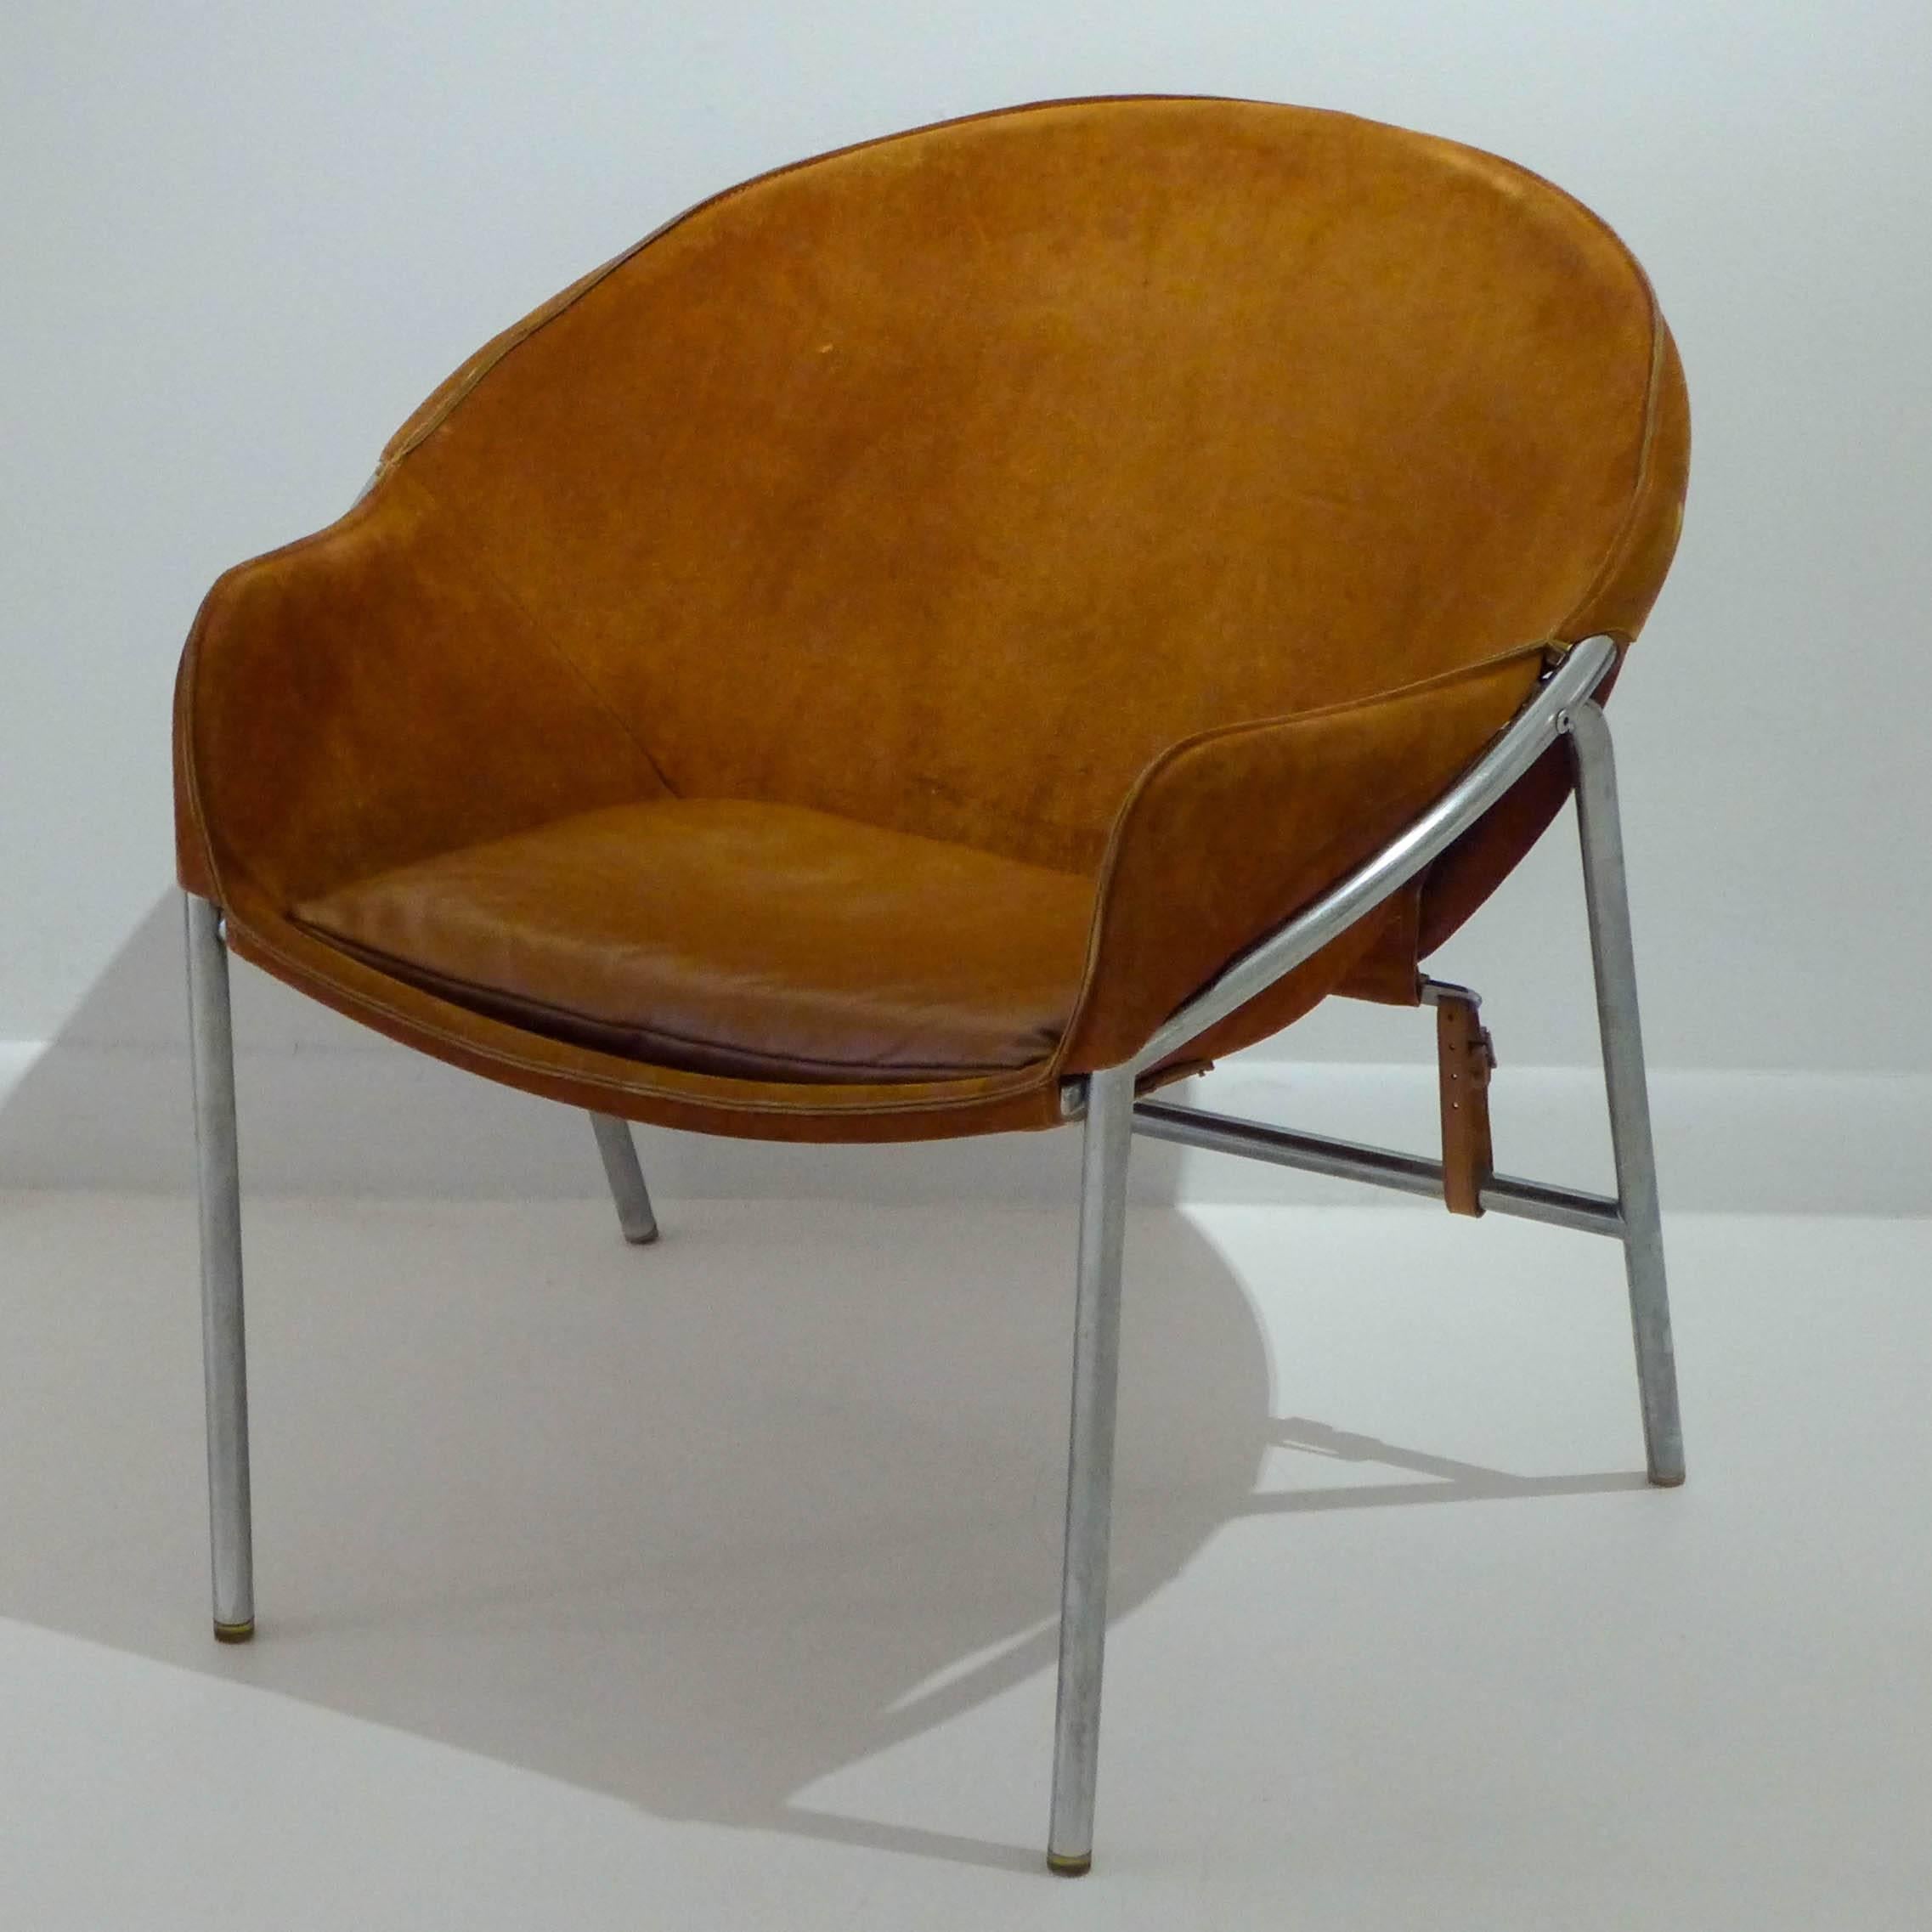 Easy chair with a tubular chrome frame, its original suede leather sling and a new leather cushion. Designed by Erik Ole Jorgensen and produced by Bovirke, Denmark, circa 1958.